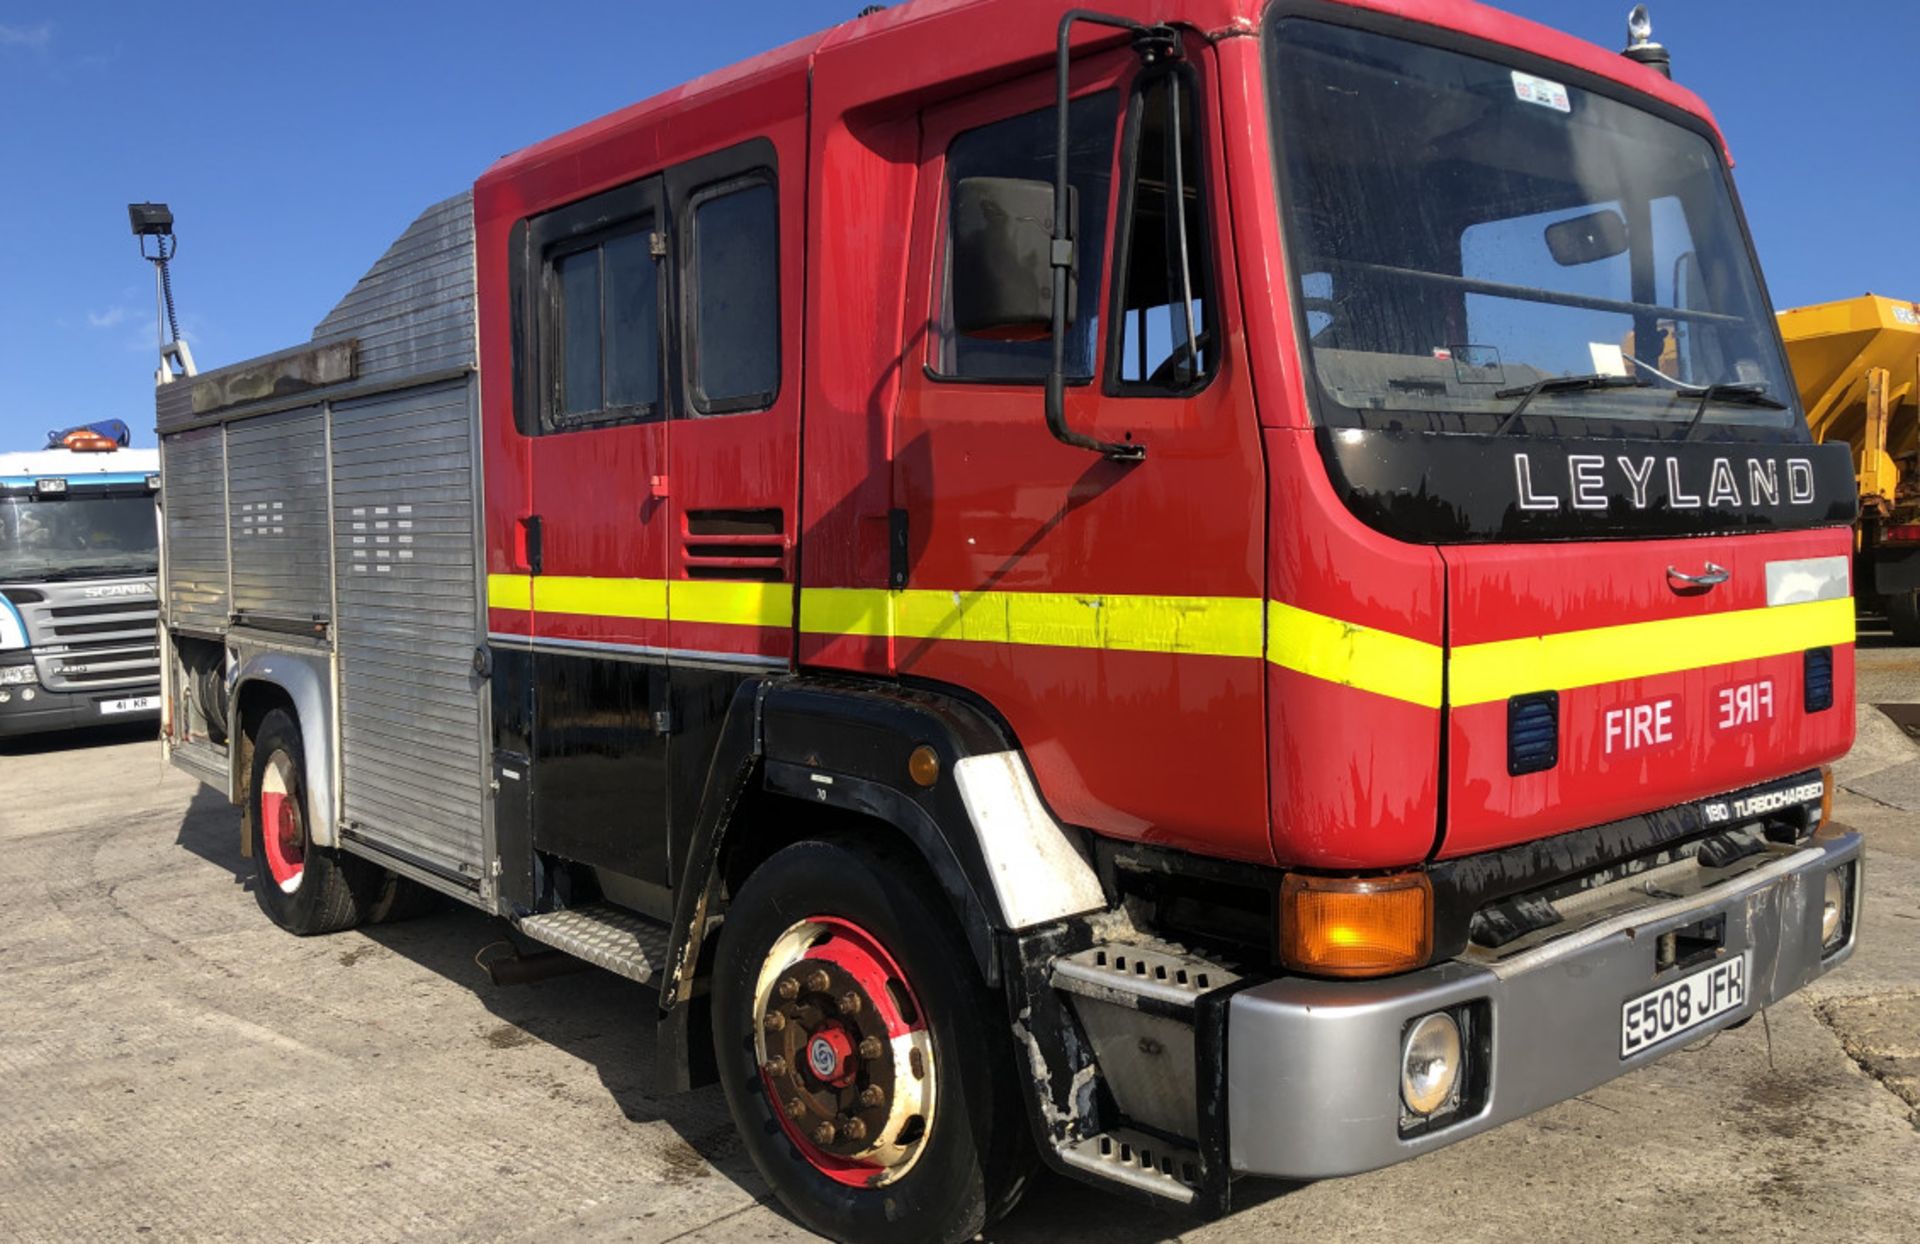 LEYLAND FRIEGHTER 1718 FIRE TENDER TRUCK - Image 11 of 11